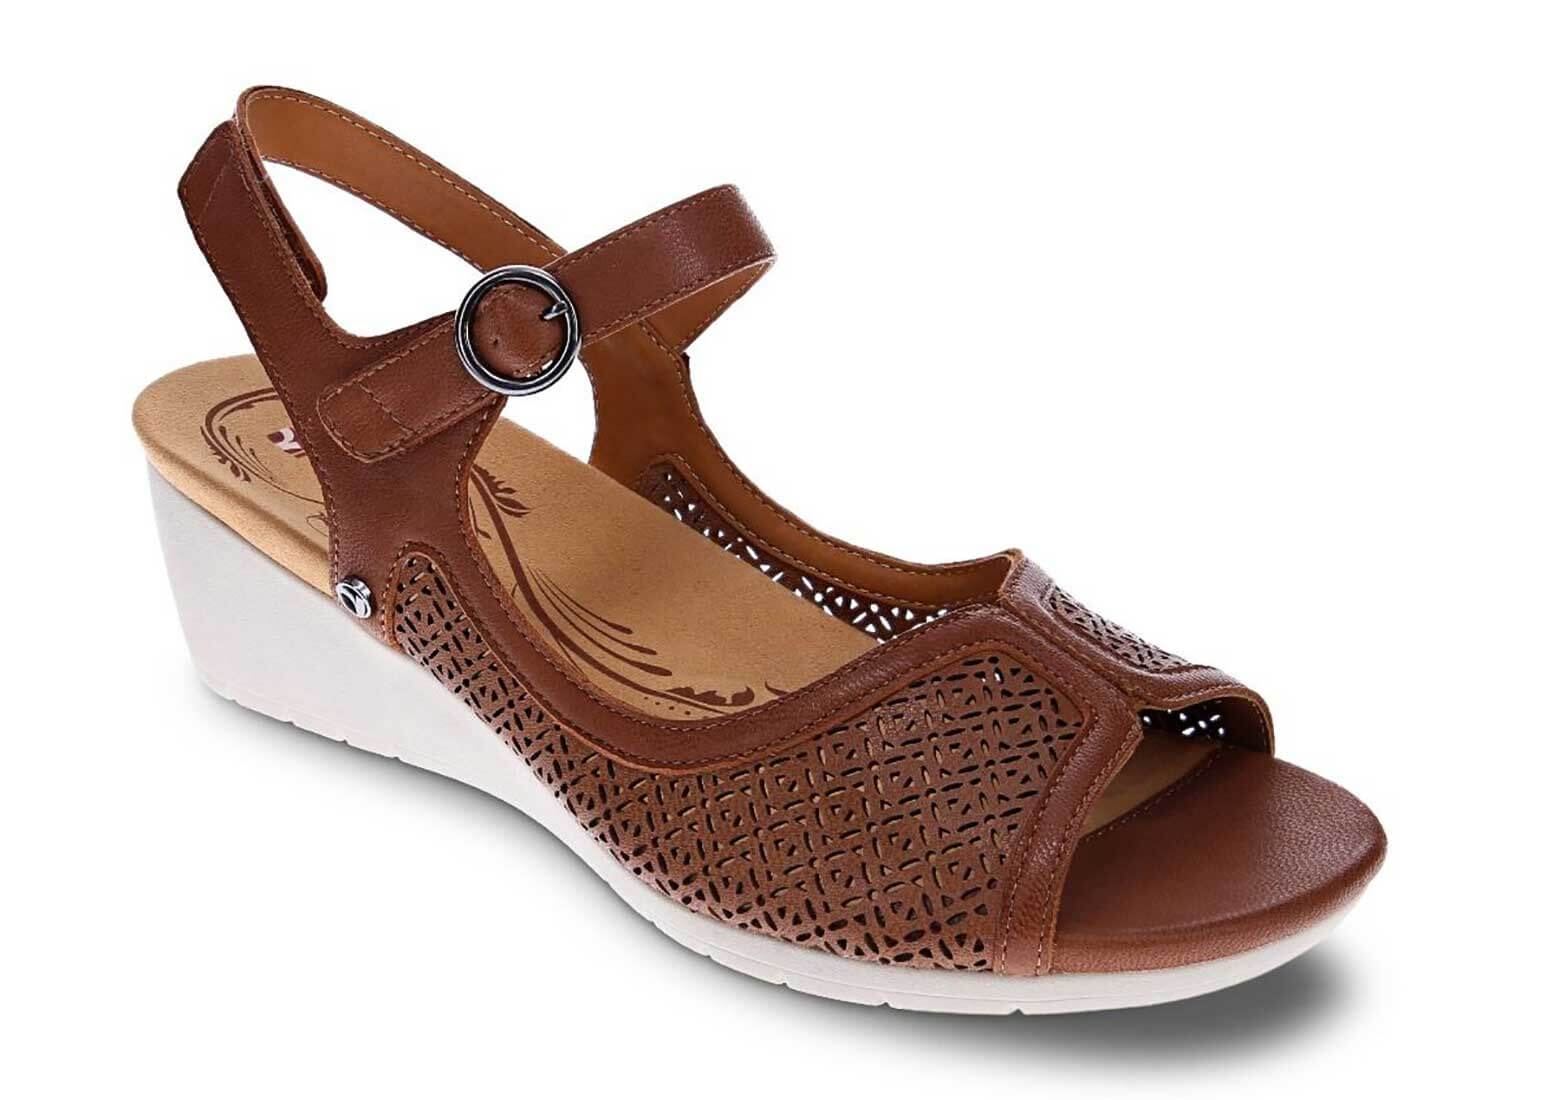 Revere Kaya - Women's Wedge Sandal - Medium - Extra Depth With Removable Foot Beds